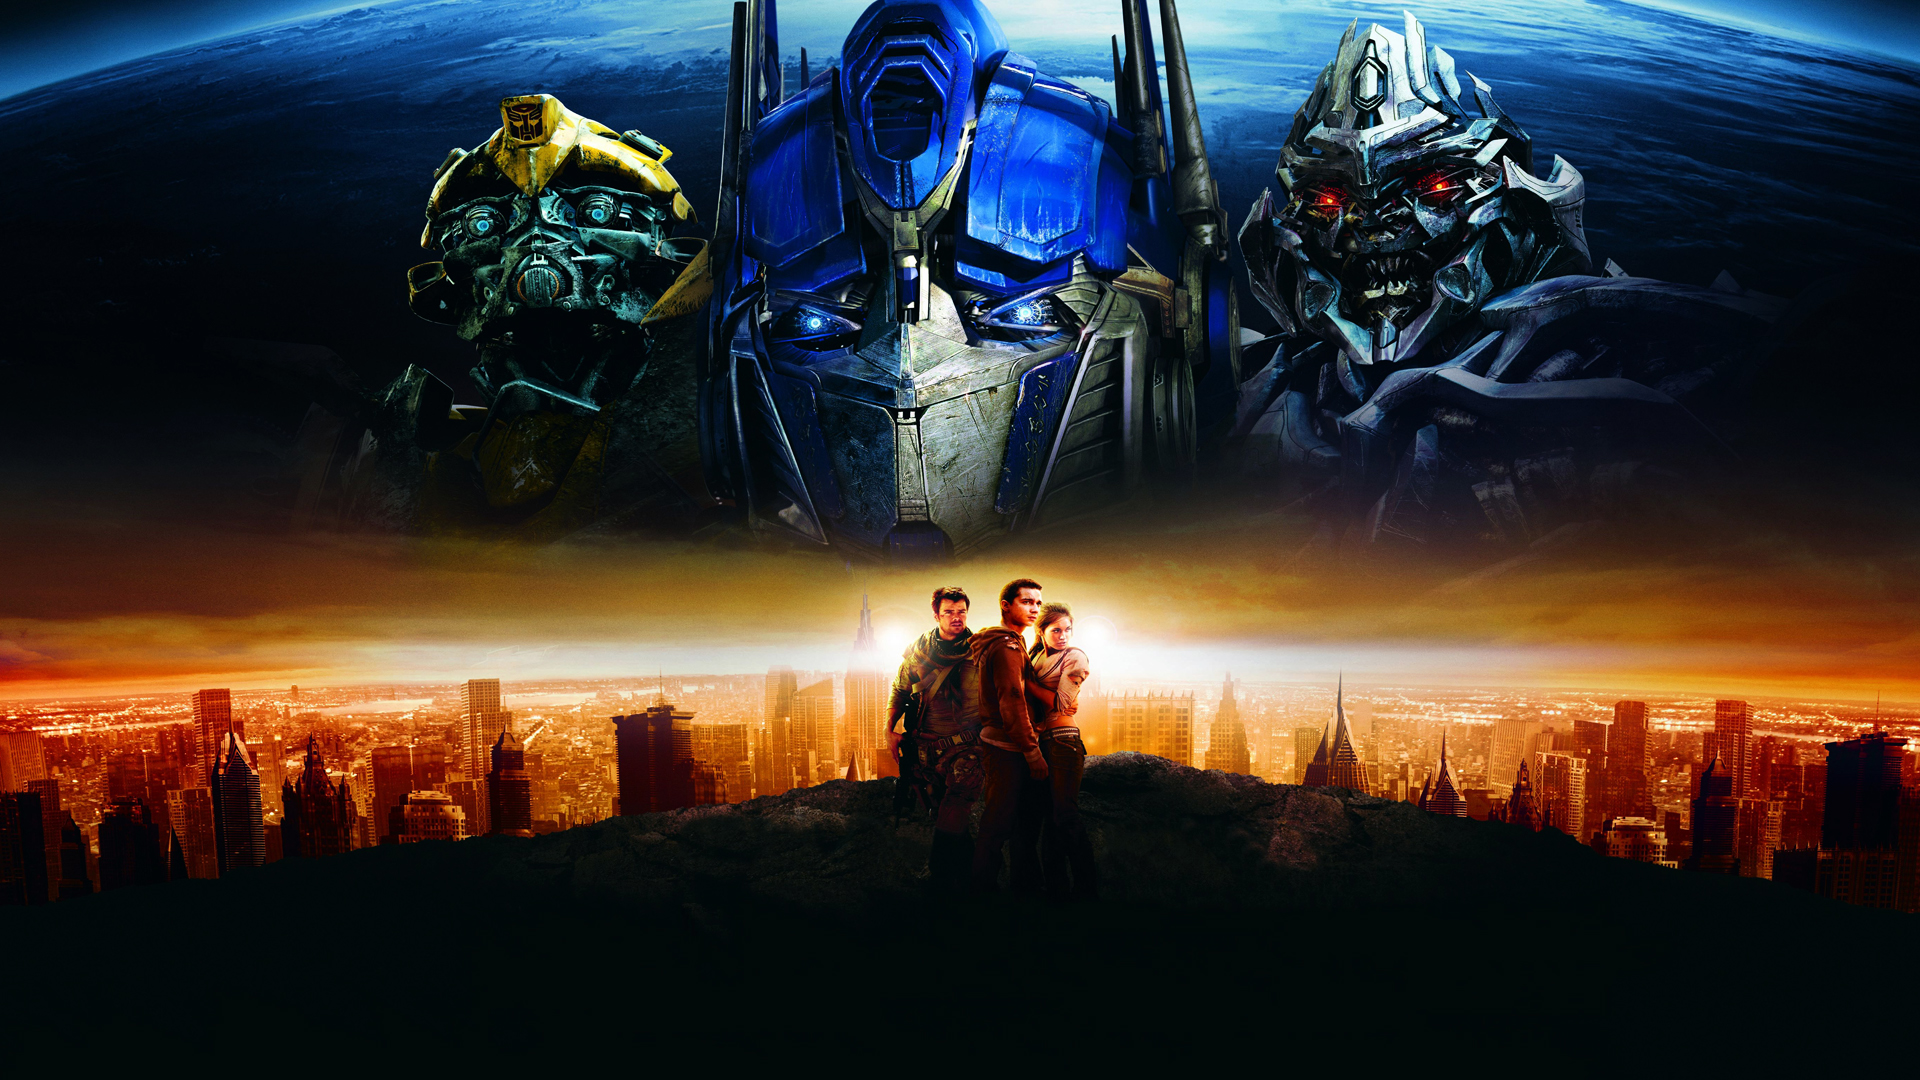 480 Transformers HD Wallpapers and Backgrounds